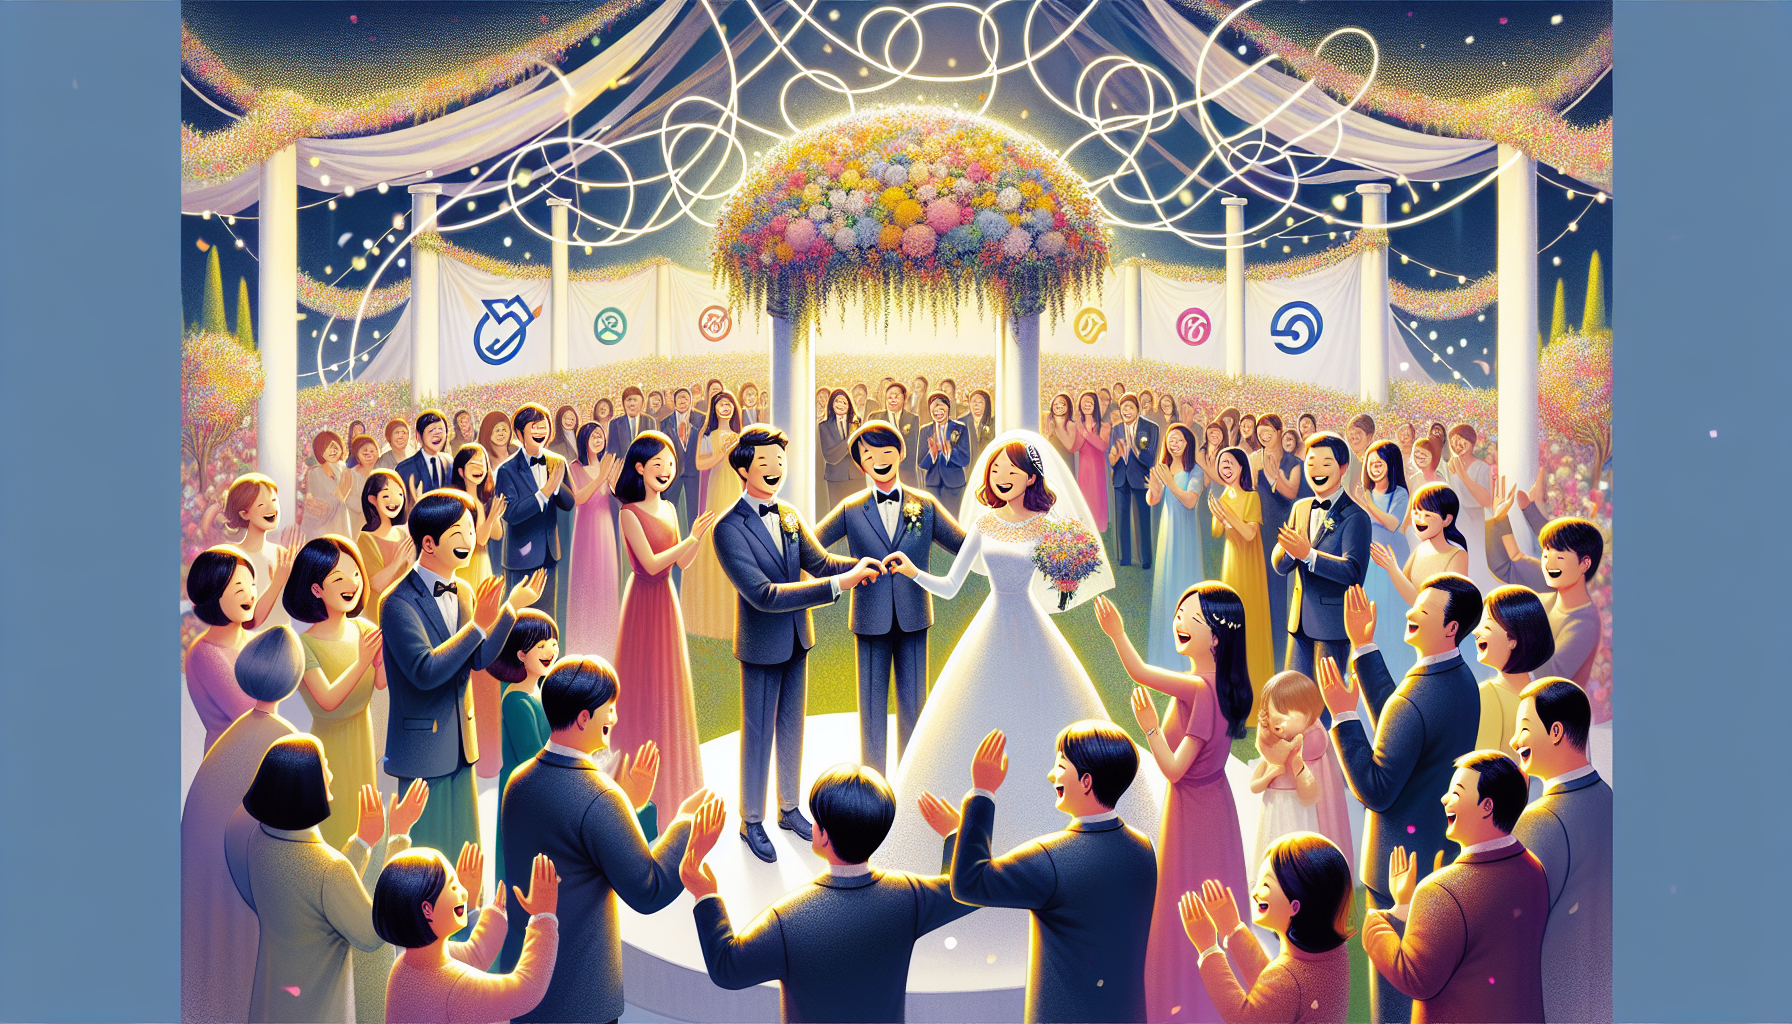 Illustration of a wedding event with various insurance providers like Emerald.